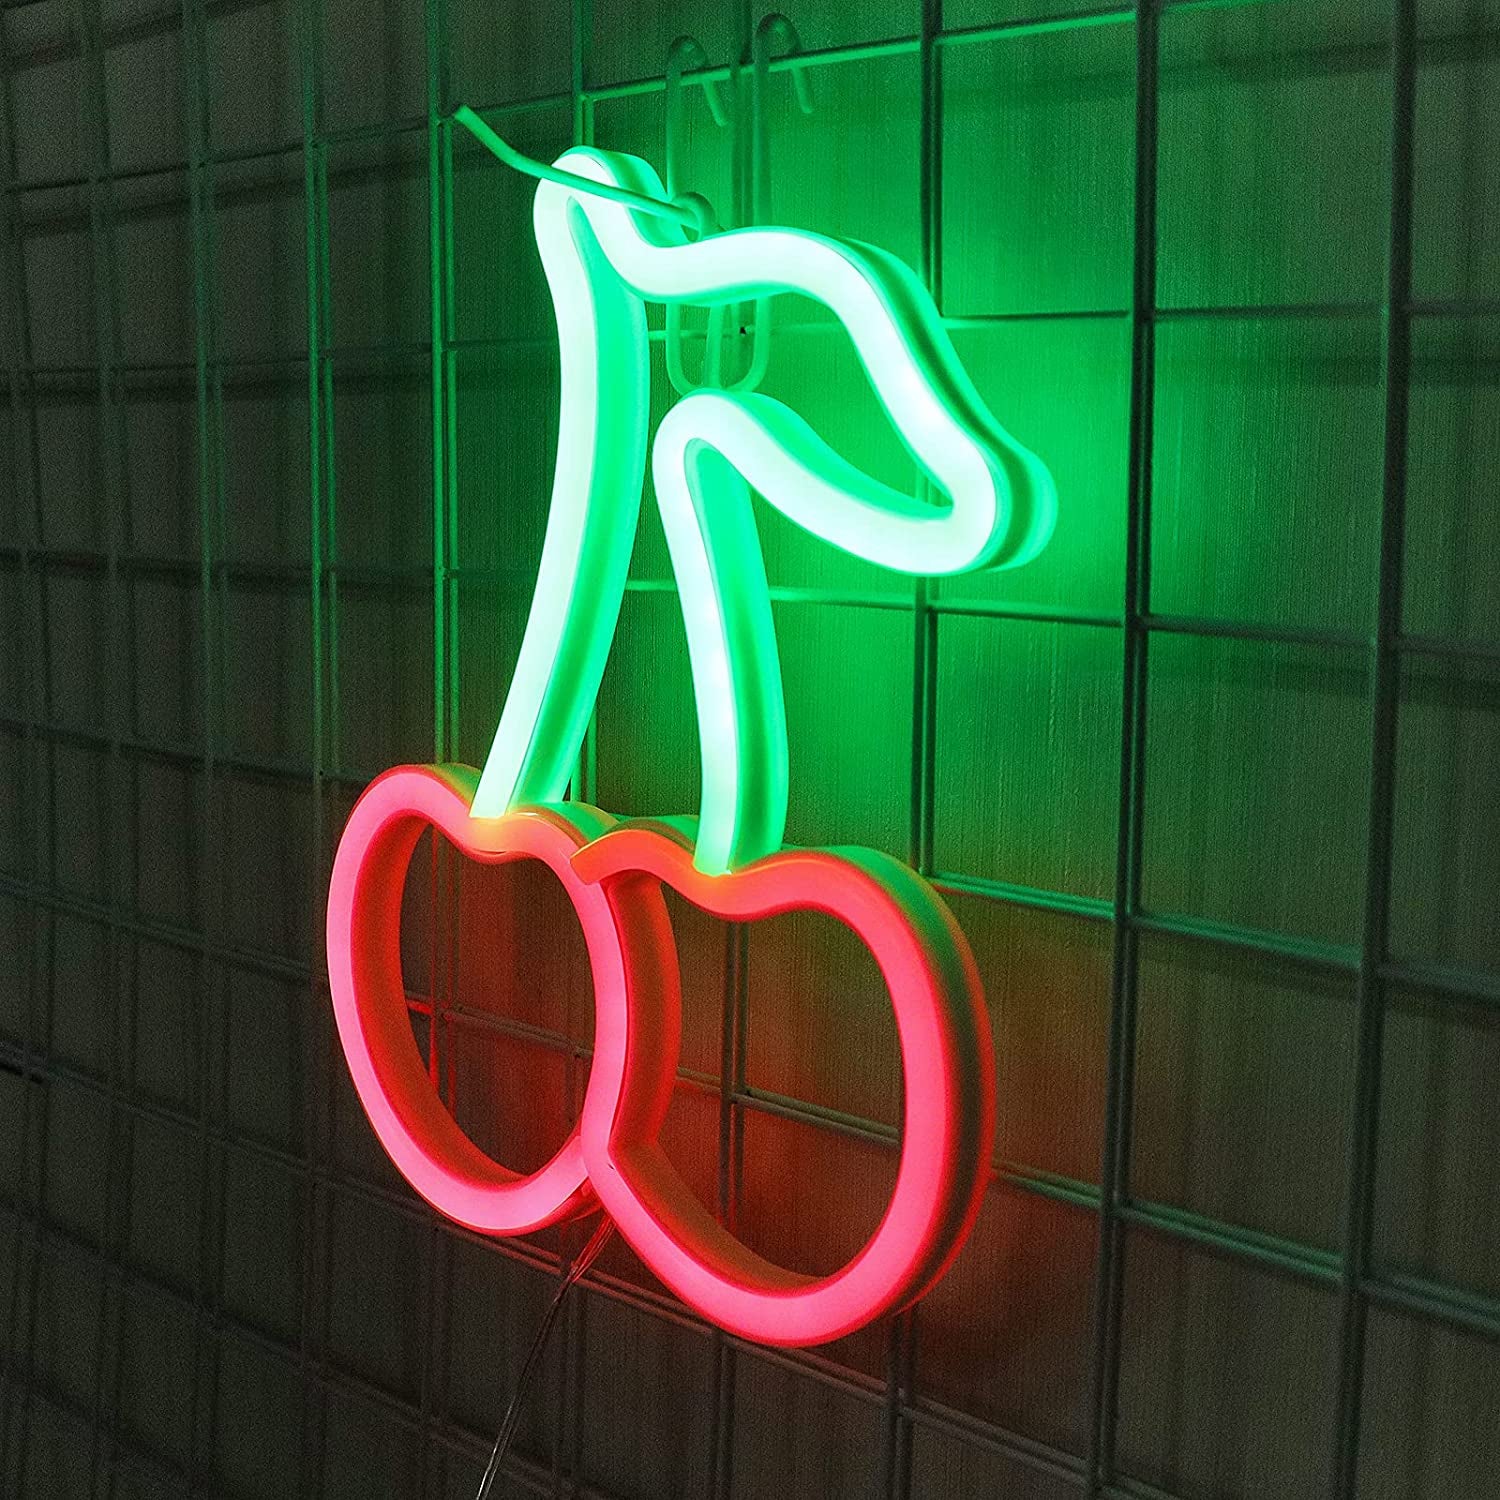 Cherry Neon Signs Led Signs Neon Light Red Room Decor Aesthetic Led Light Fruit Night Light for Bedroom Bar Hotel Party Game Room Wall Art Decoration